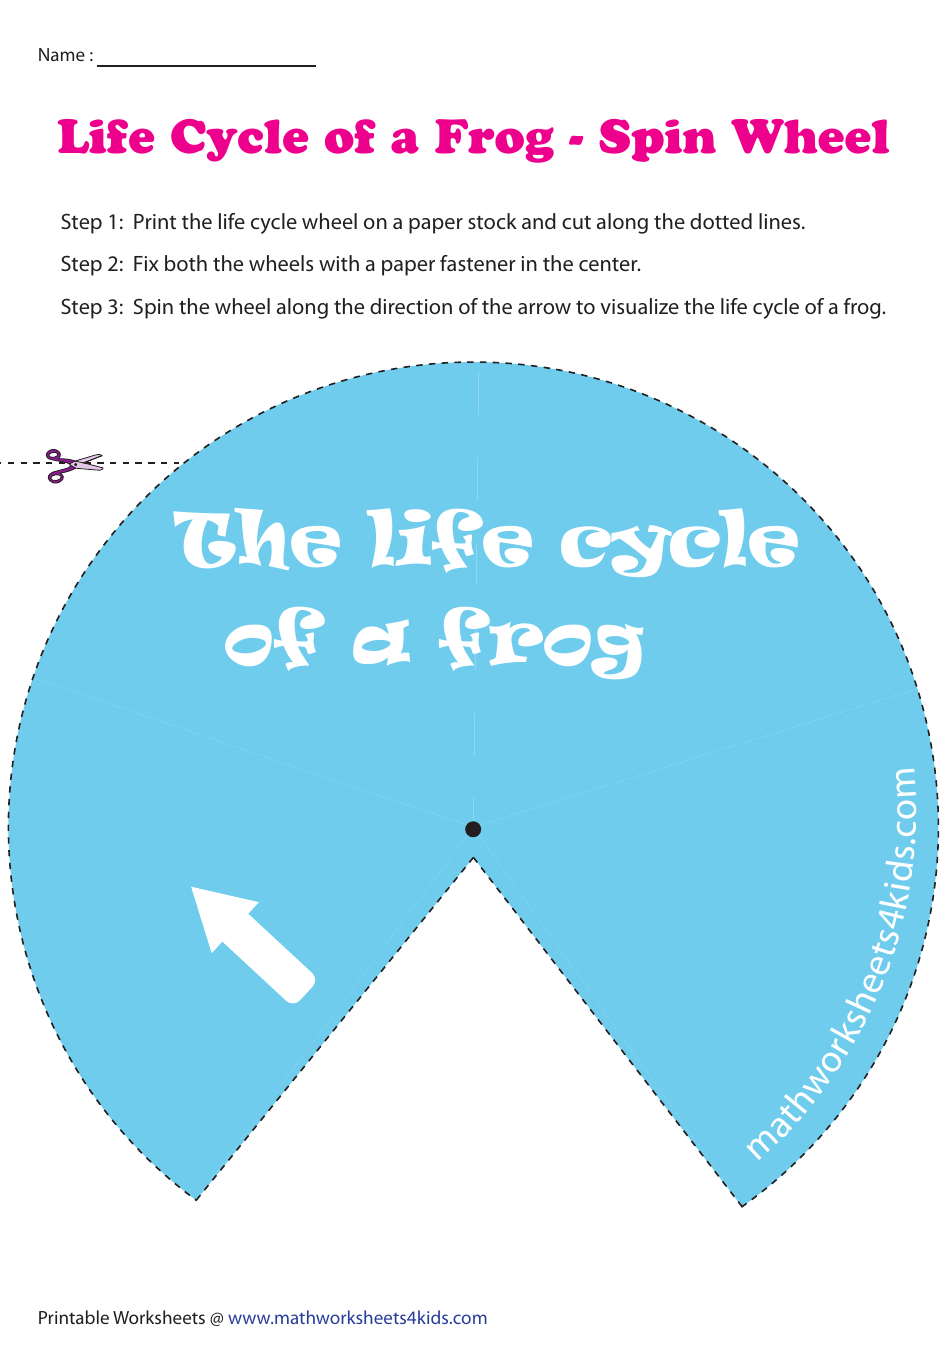 Frog Life Cycle Spin Wheel, Page 1